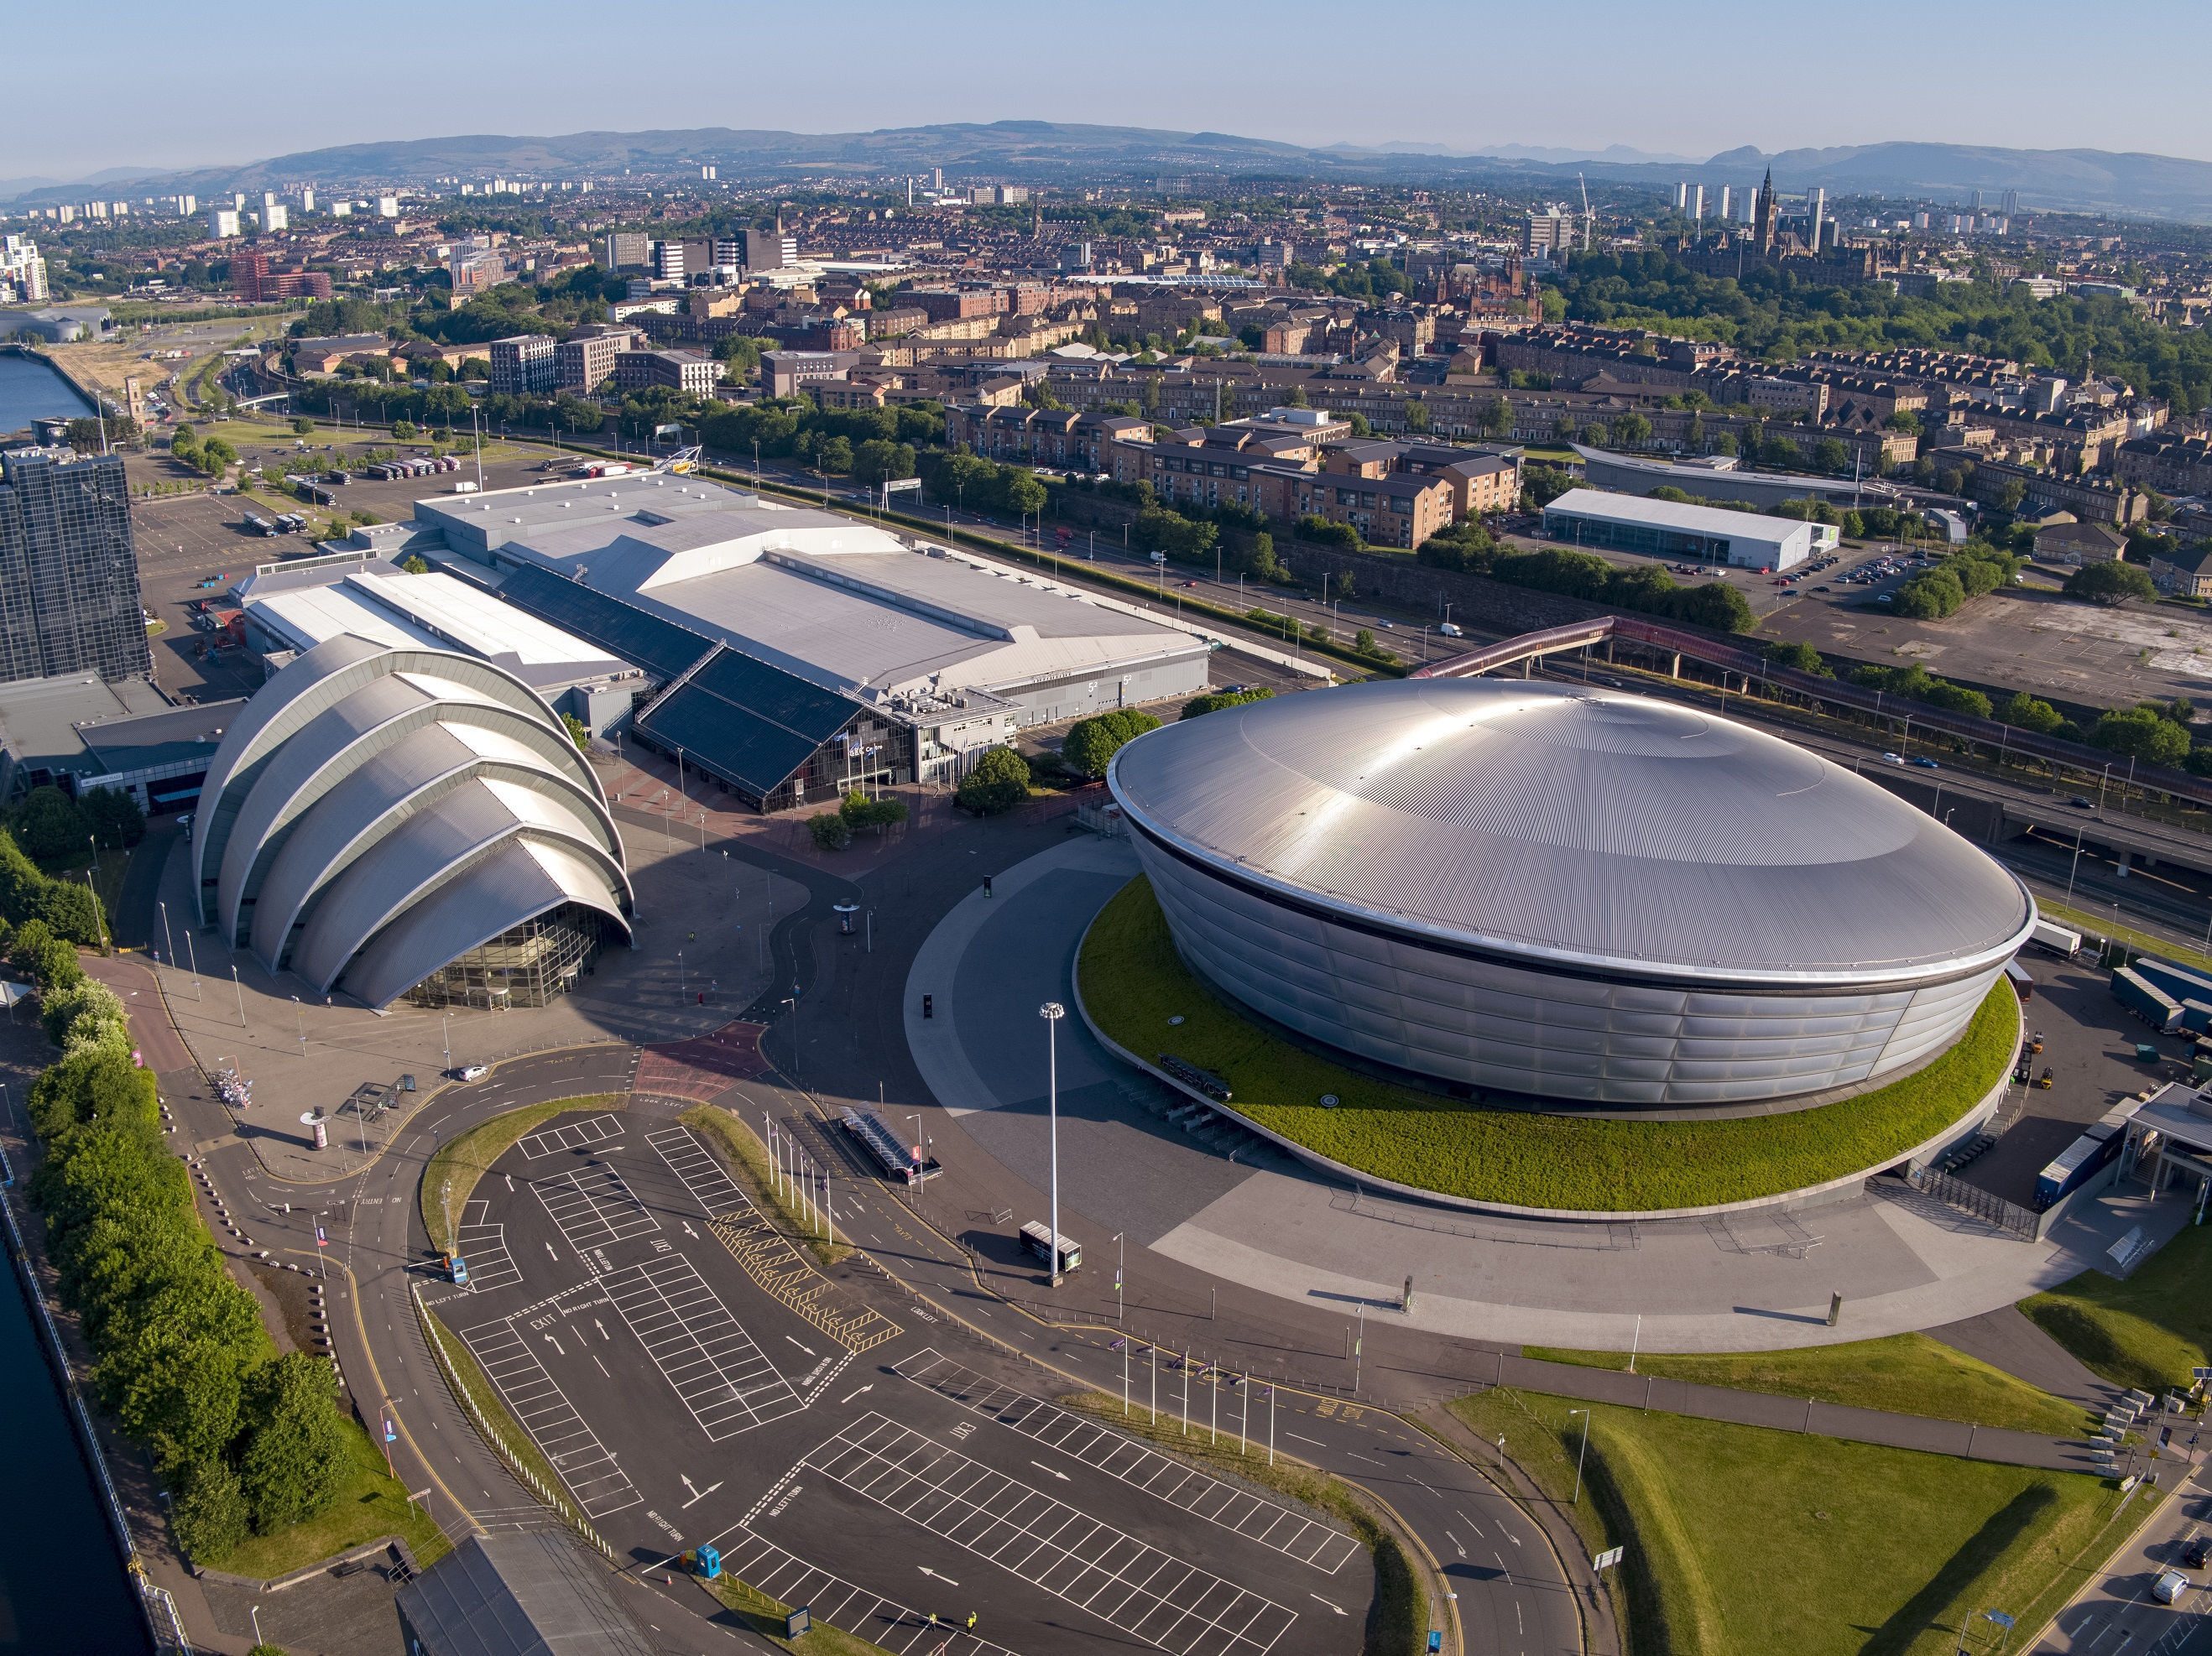 COP26 will be held at Glasgow’s Scottish Event Campus from October 31 to November 12.